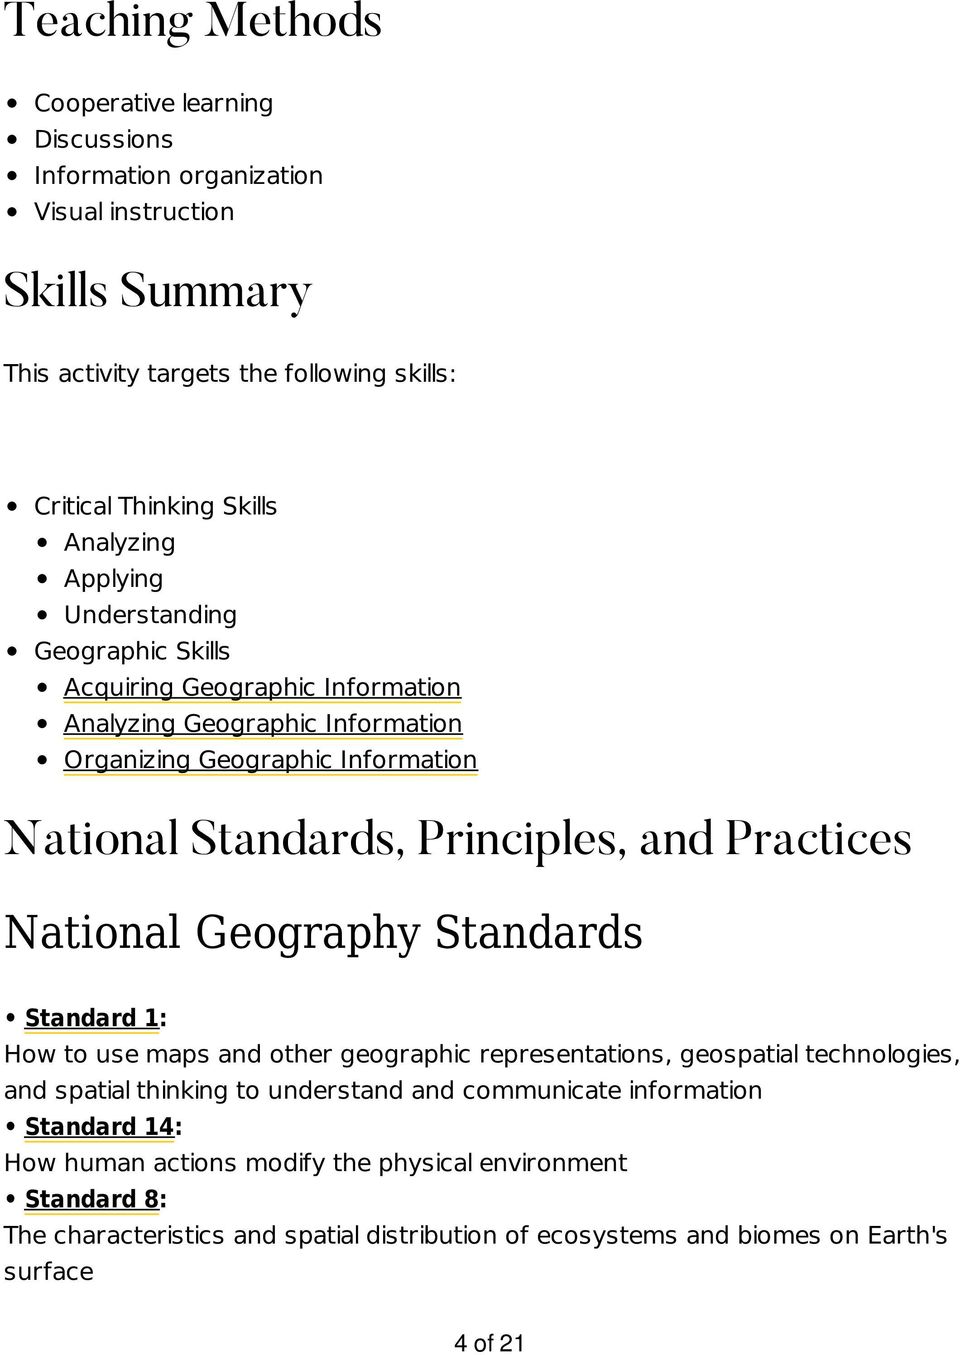 and Practices National Geography Standards Standard 1: How to use maps and other geographic representations, geospatial technologies, and spatial thinking to understand and